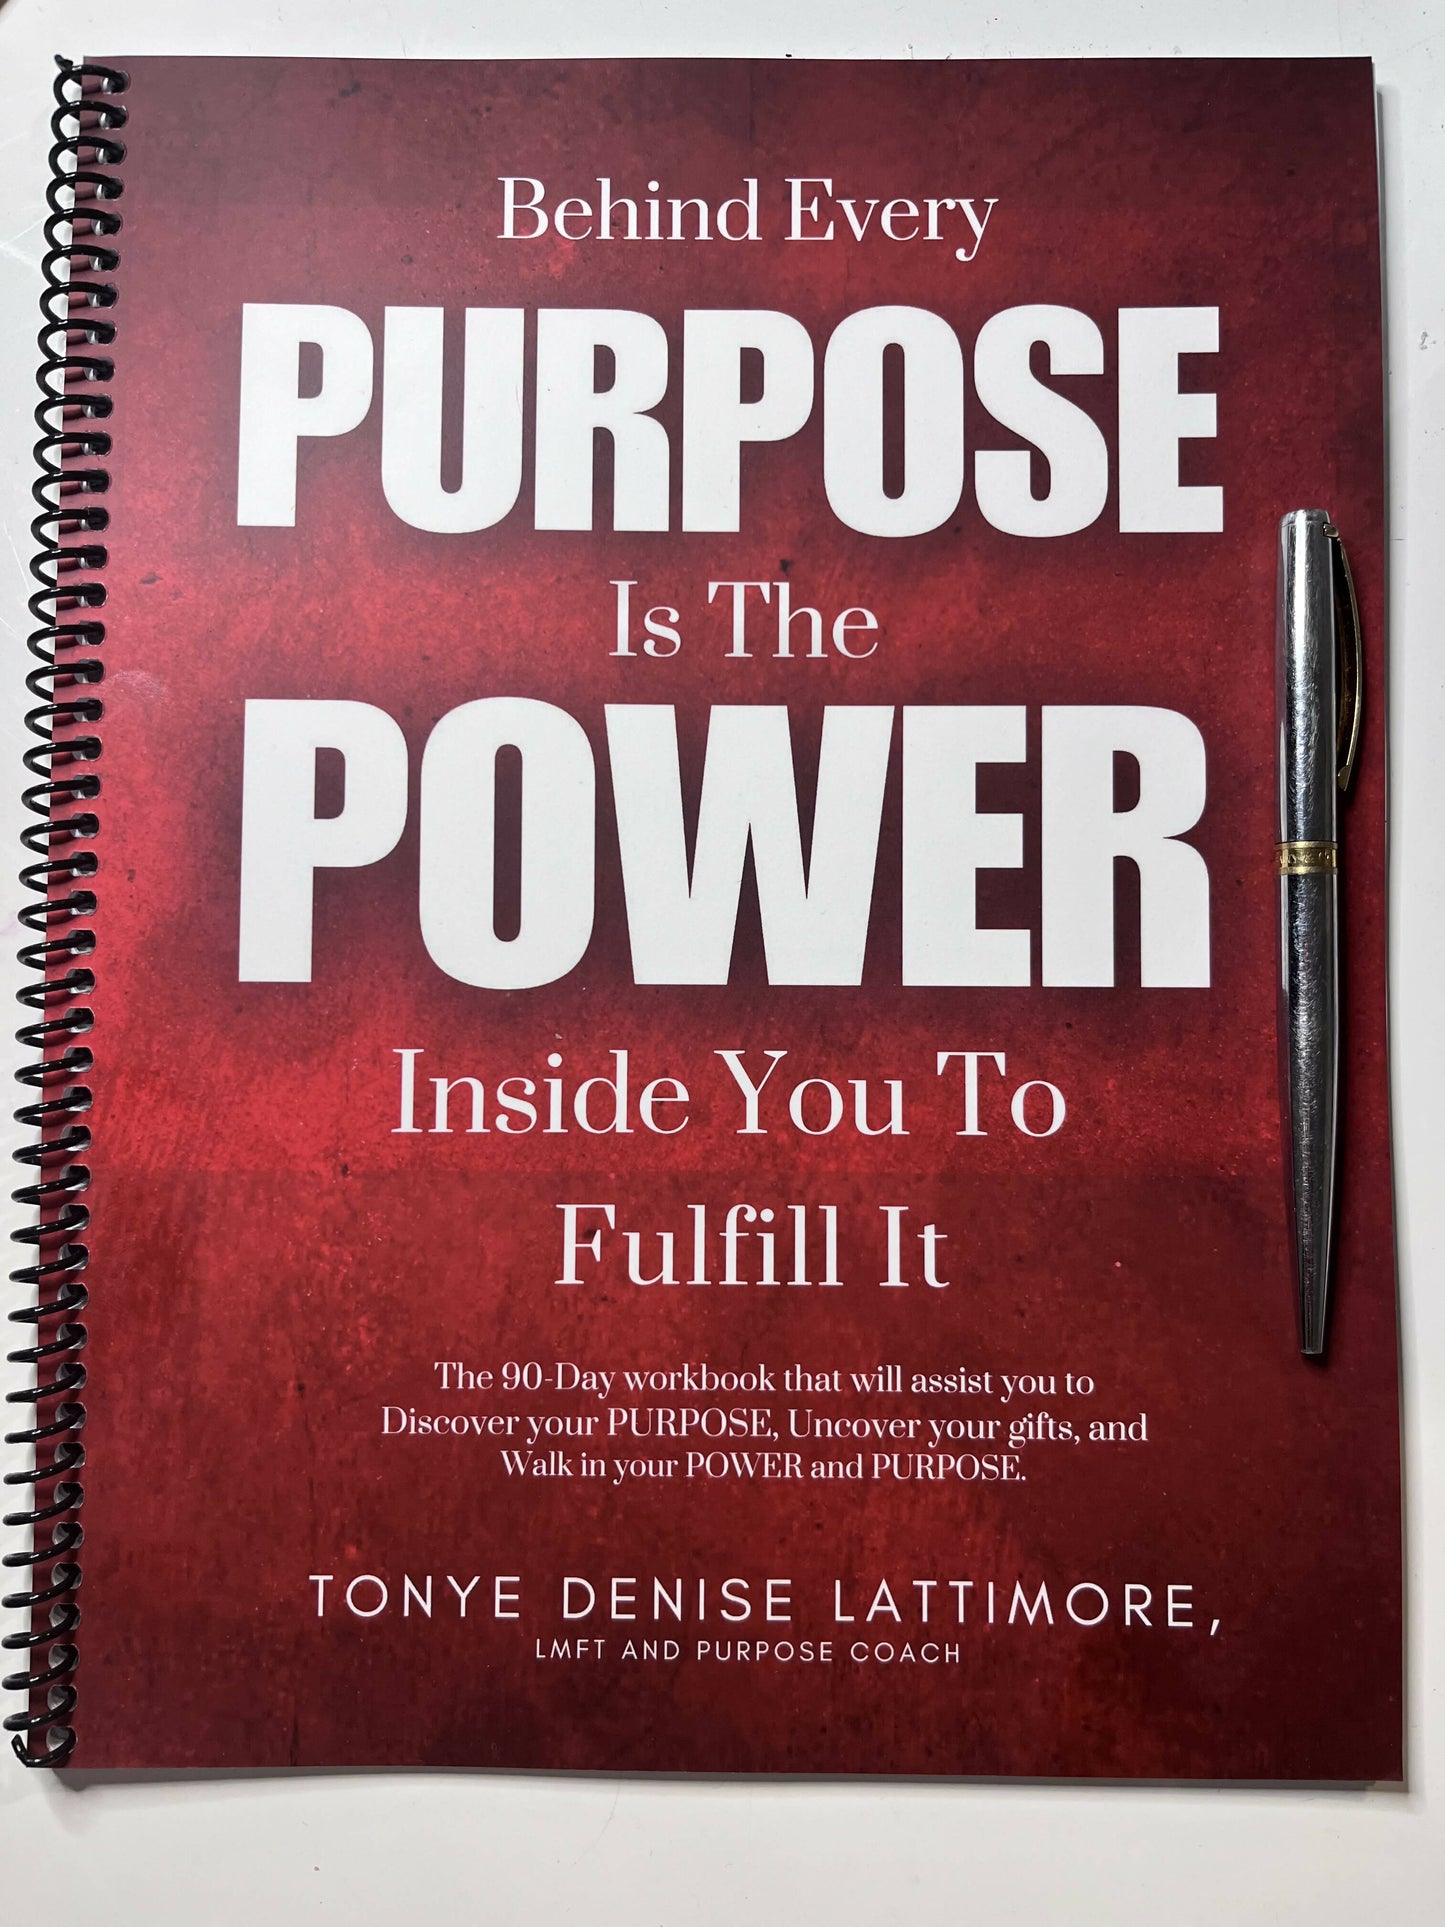 Behind Every PURPOSE is the POWER inside You to Fulfill it